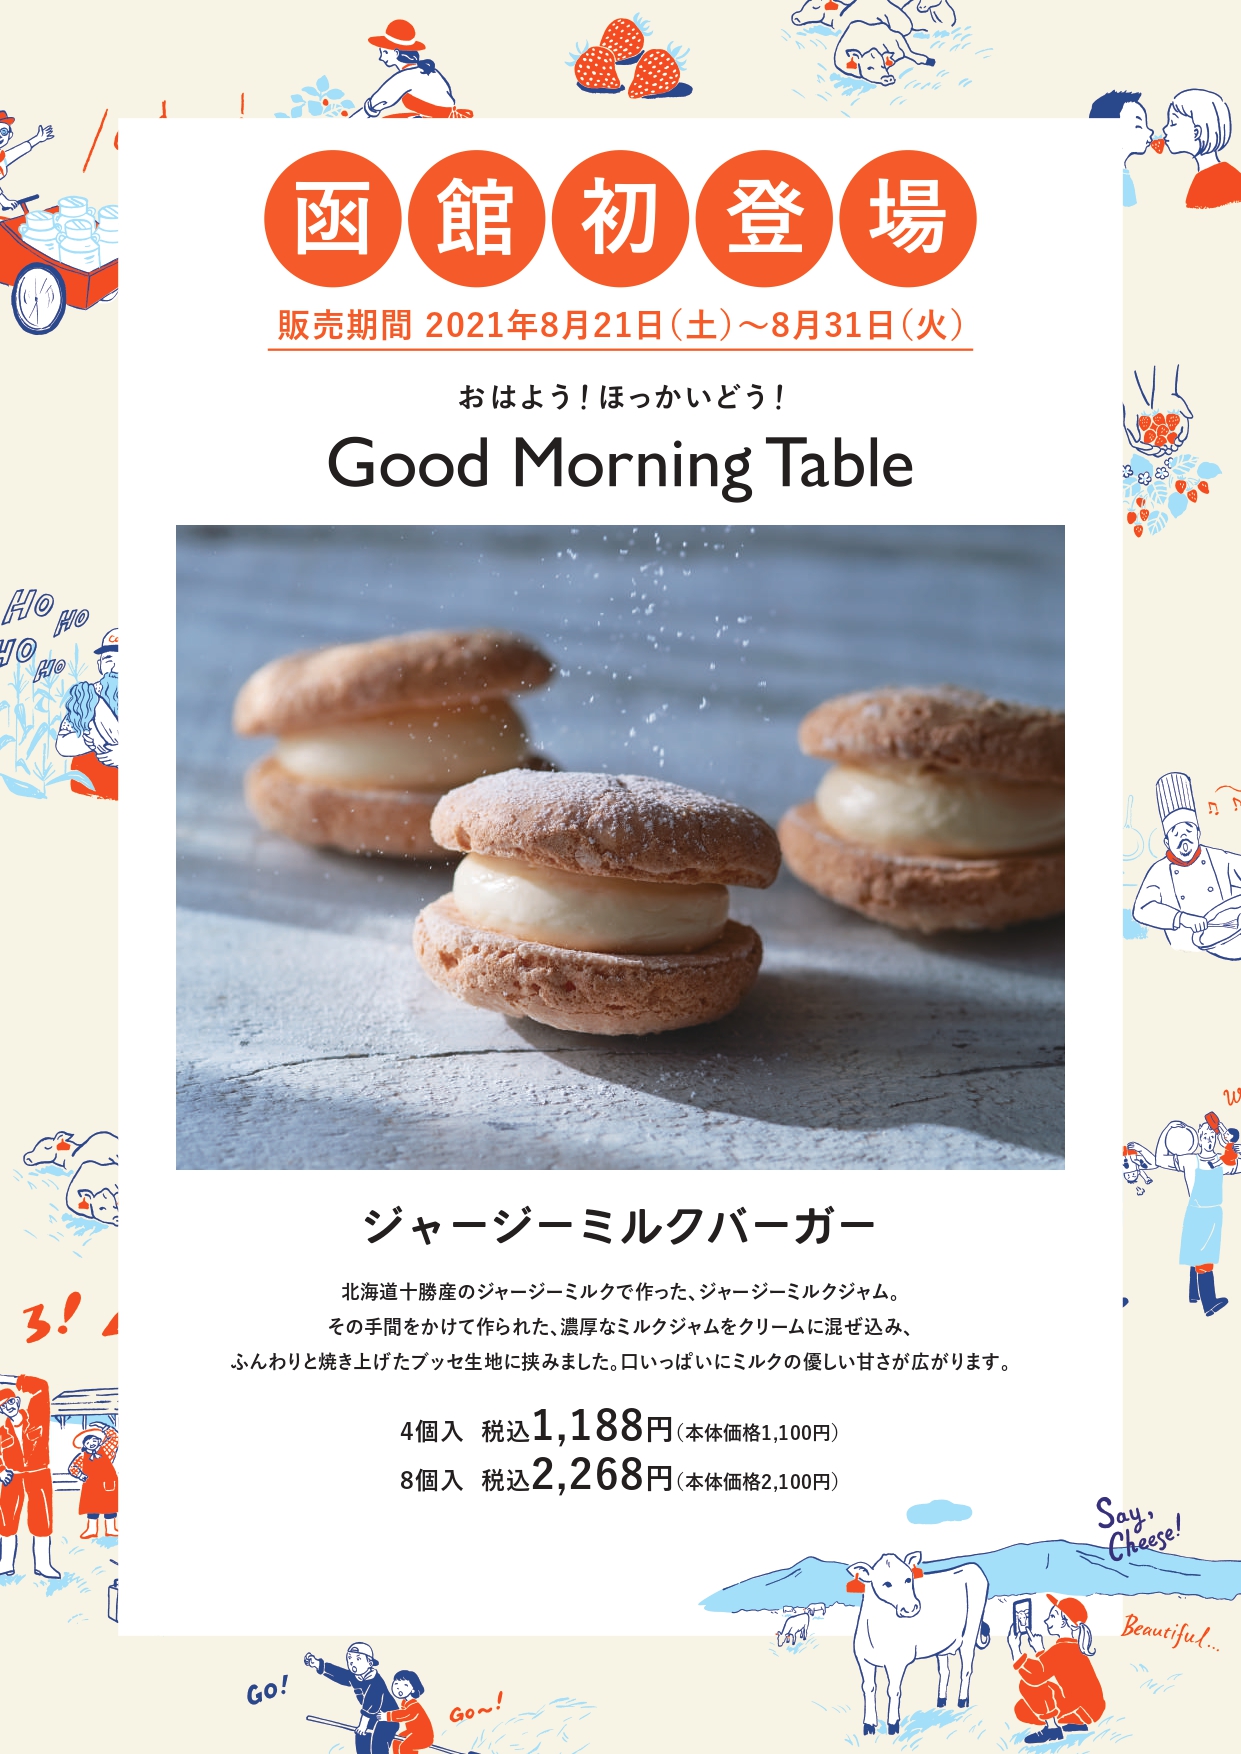 「Good Morning Table」in 函館空港の開催～道南地域初上陸ブランドのスイーツ～（終了致しました）